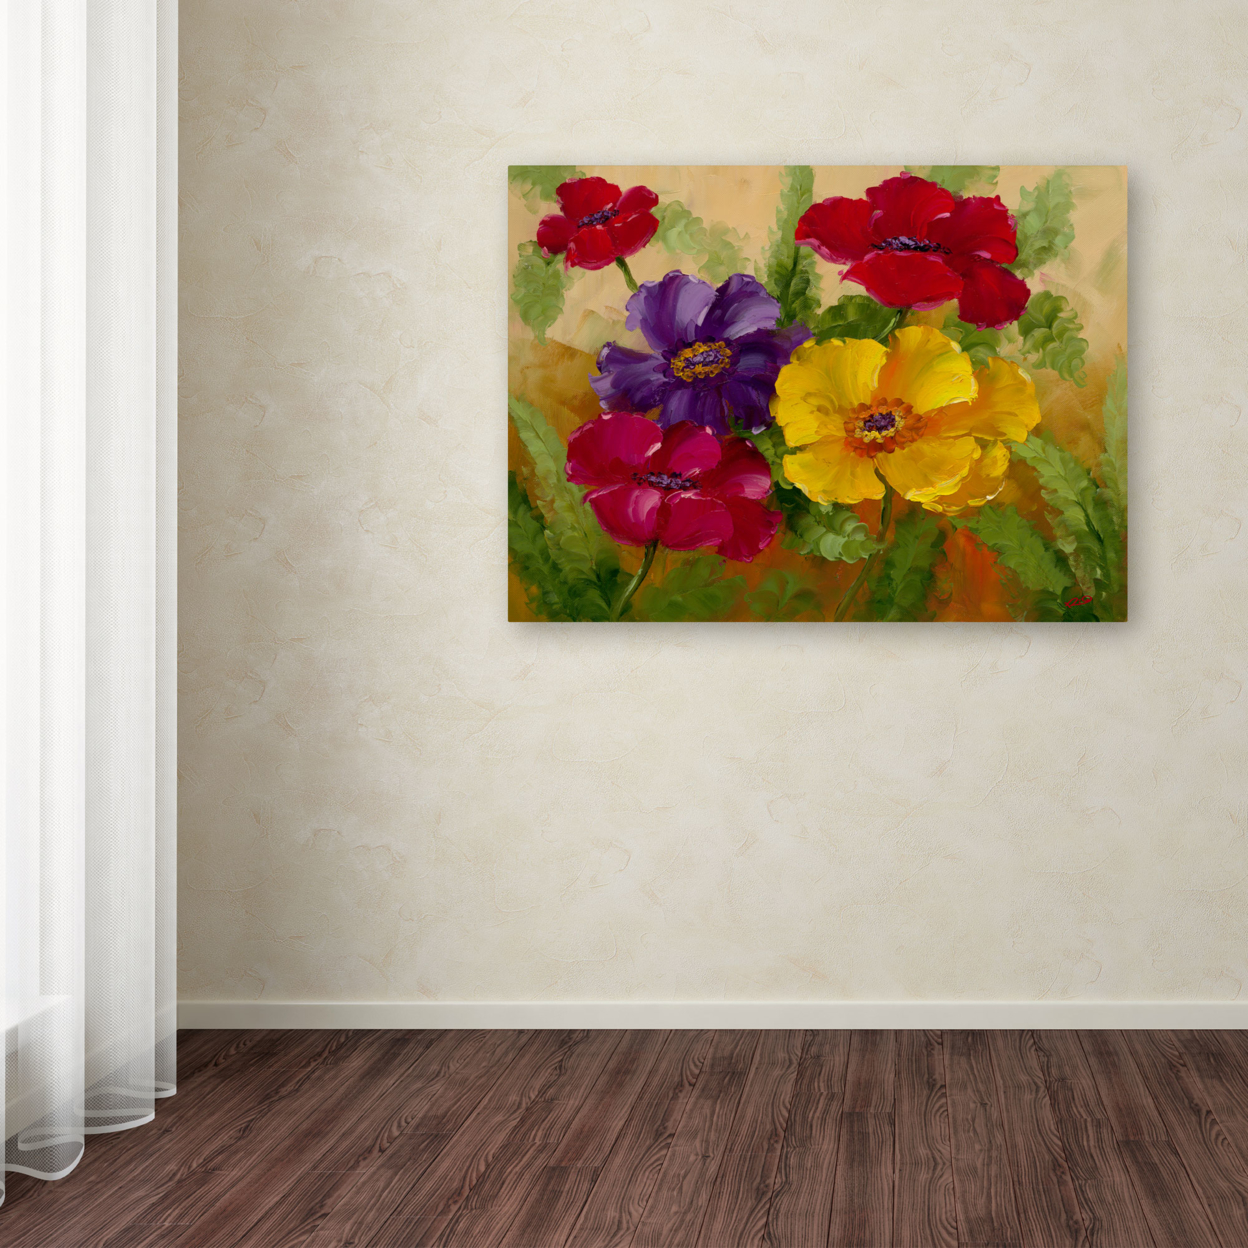 Rio 'Flowers' Canvas Wall Art 35 X 47 Inches